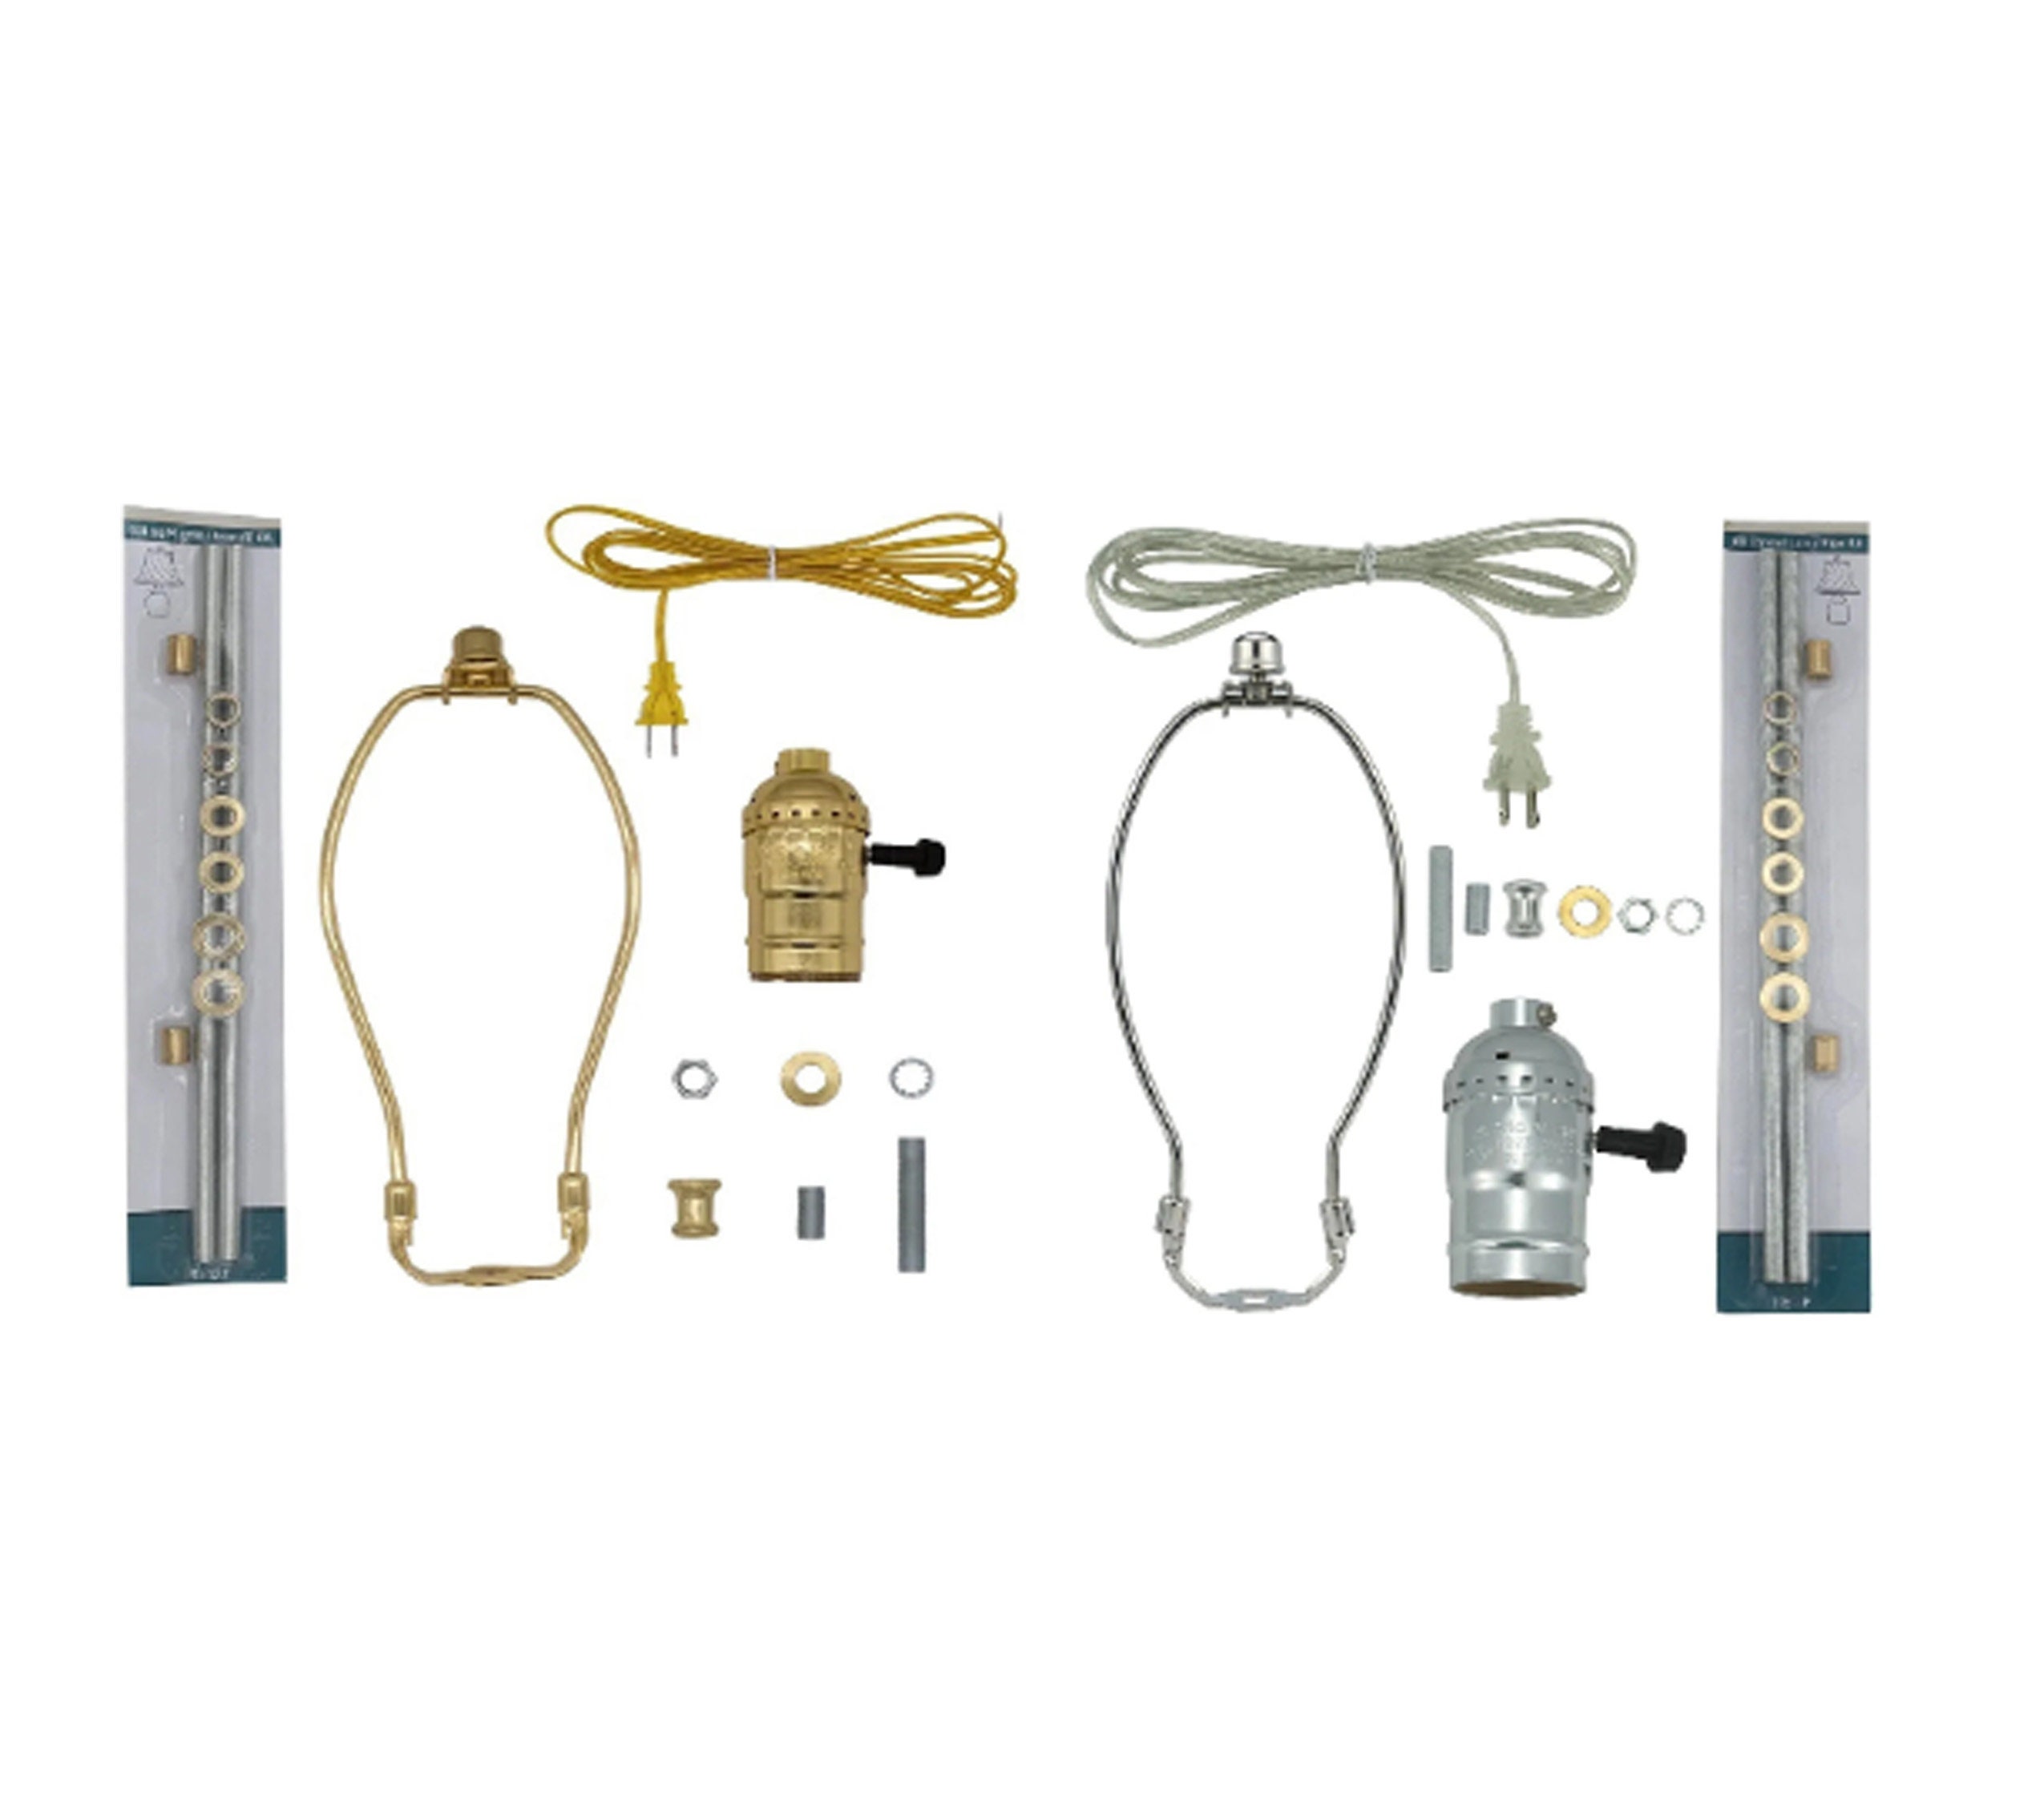 Floor Lamp Making Kit - Repair or Rewire Lamps with All Premium Essential  Parts, 10 Inch Harp and Extra Long 12 Foot Cord Included (Black)